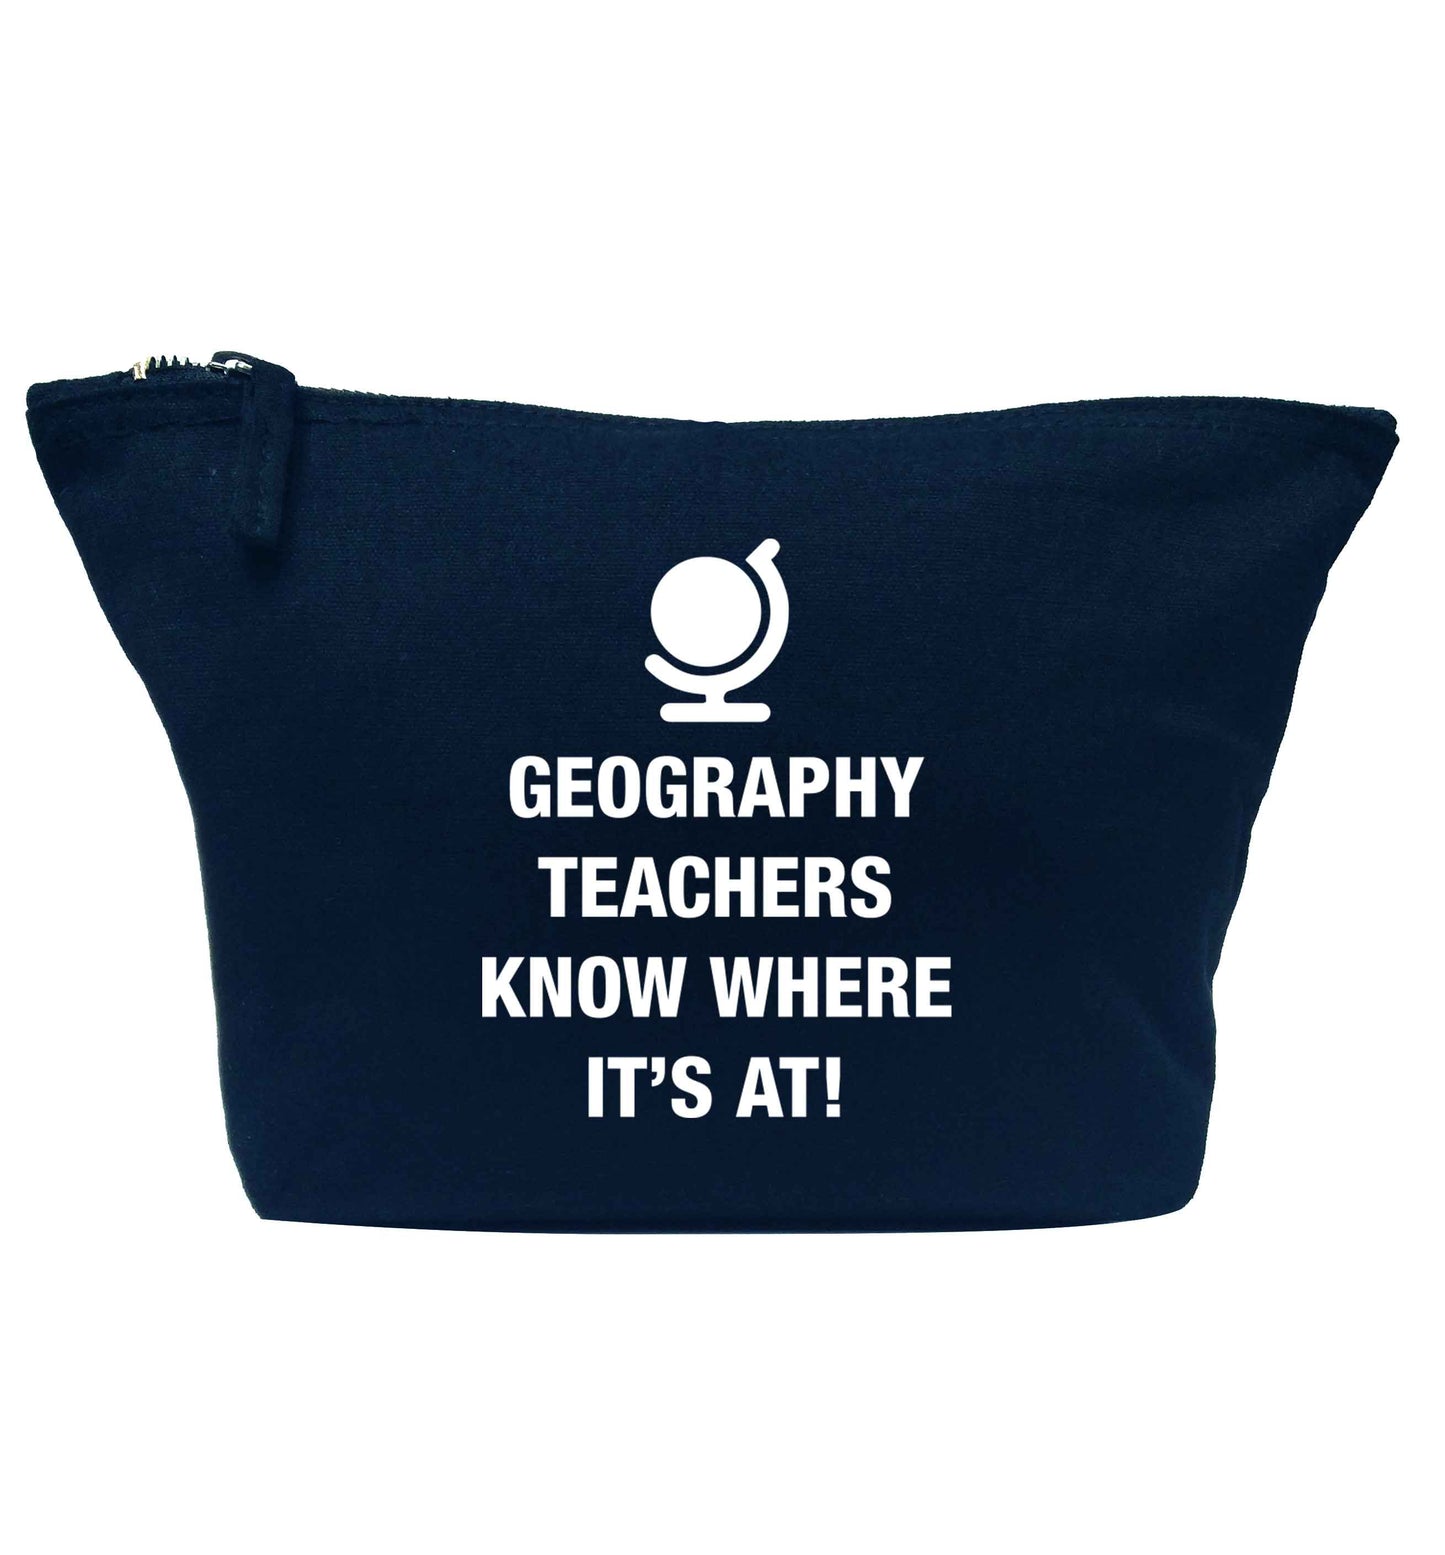 Geography teachers know where it's at navy makeup bag